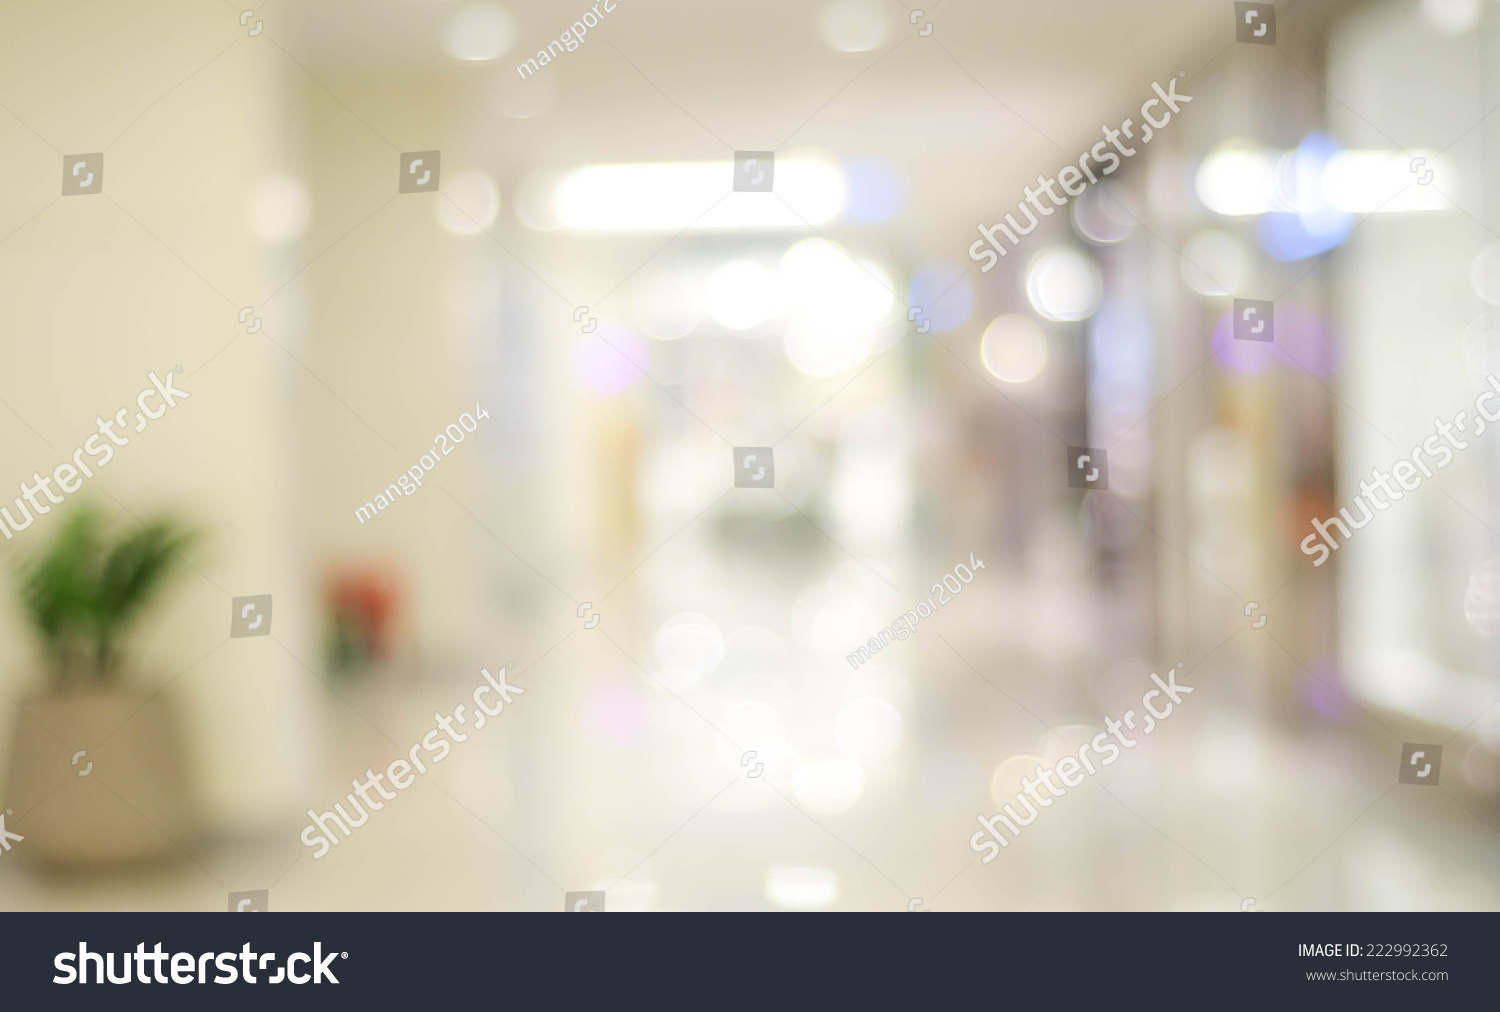 Blur light background at shop in mall for business background, blurry abstract bokeh at interior hallway #222992362